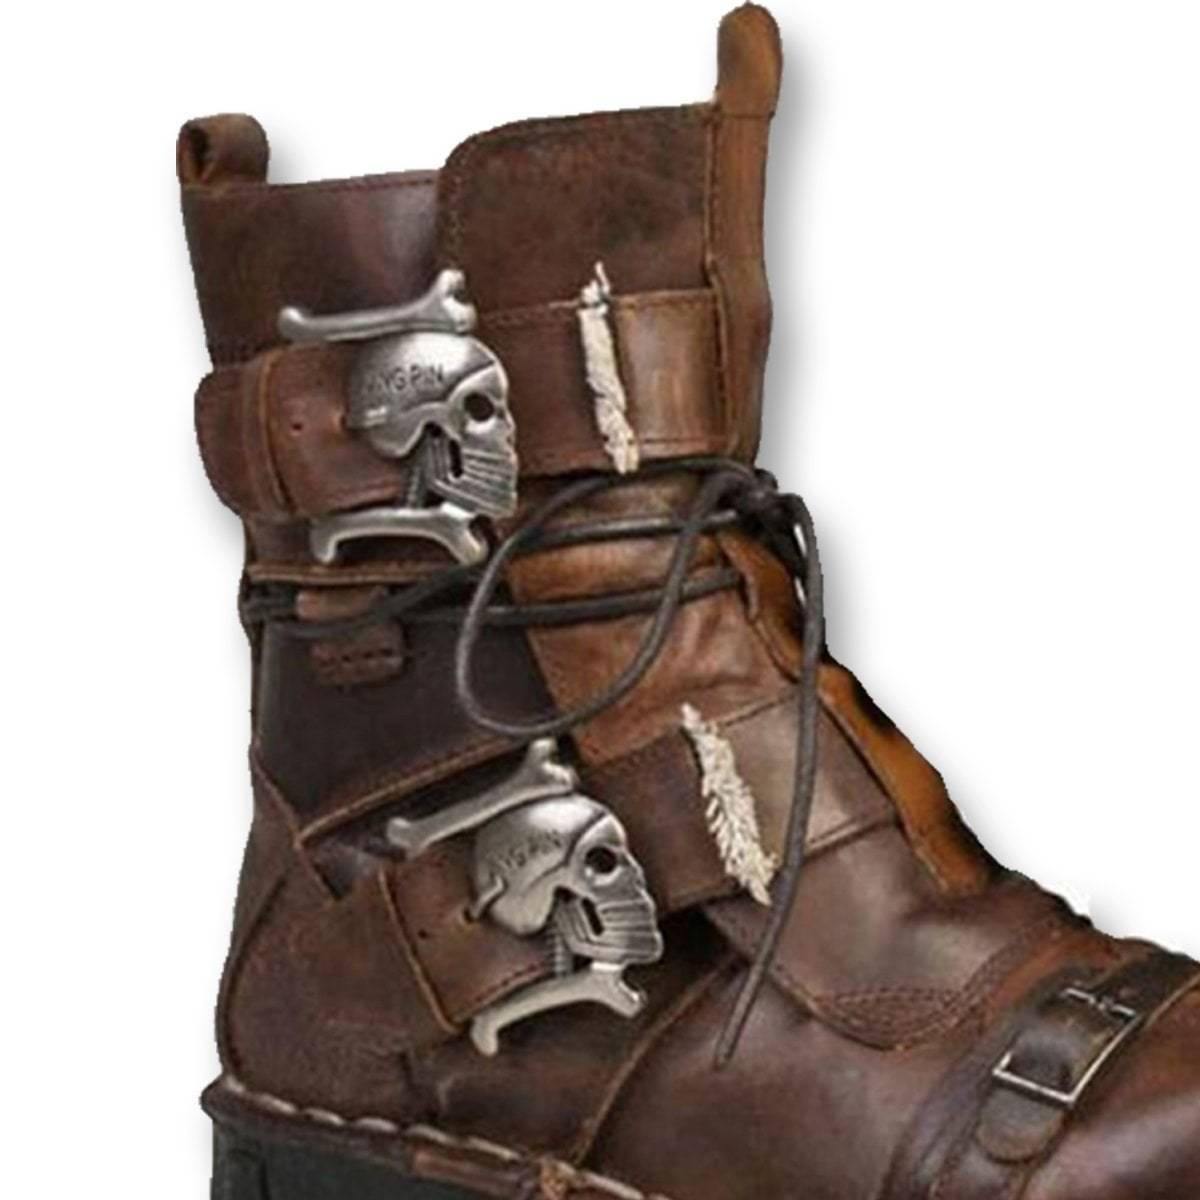 A pair of Handmade Leather Skull Boots with metal buckles and skulls.